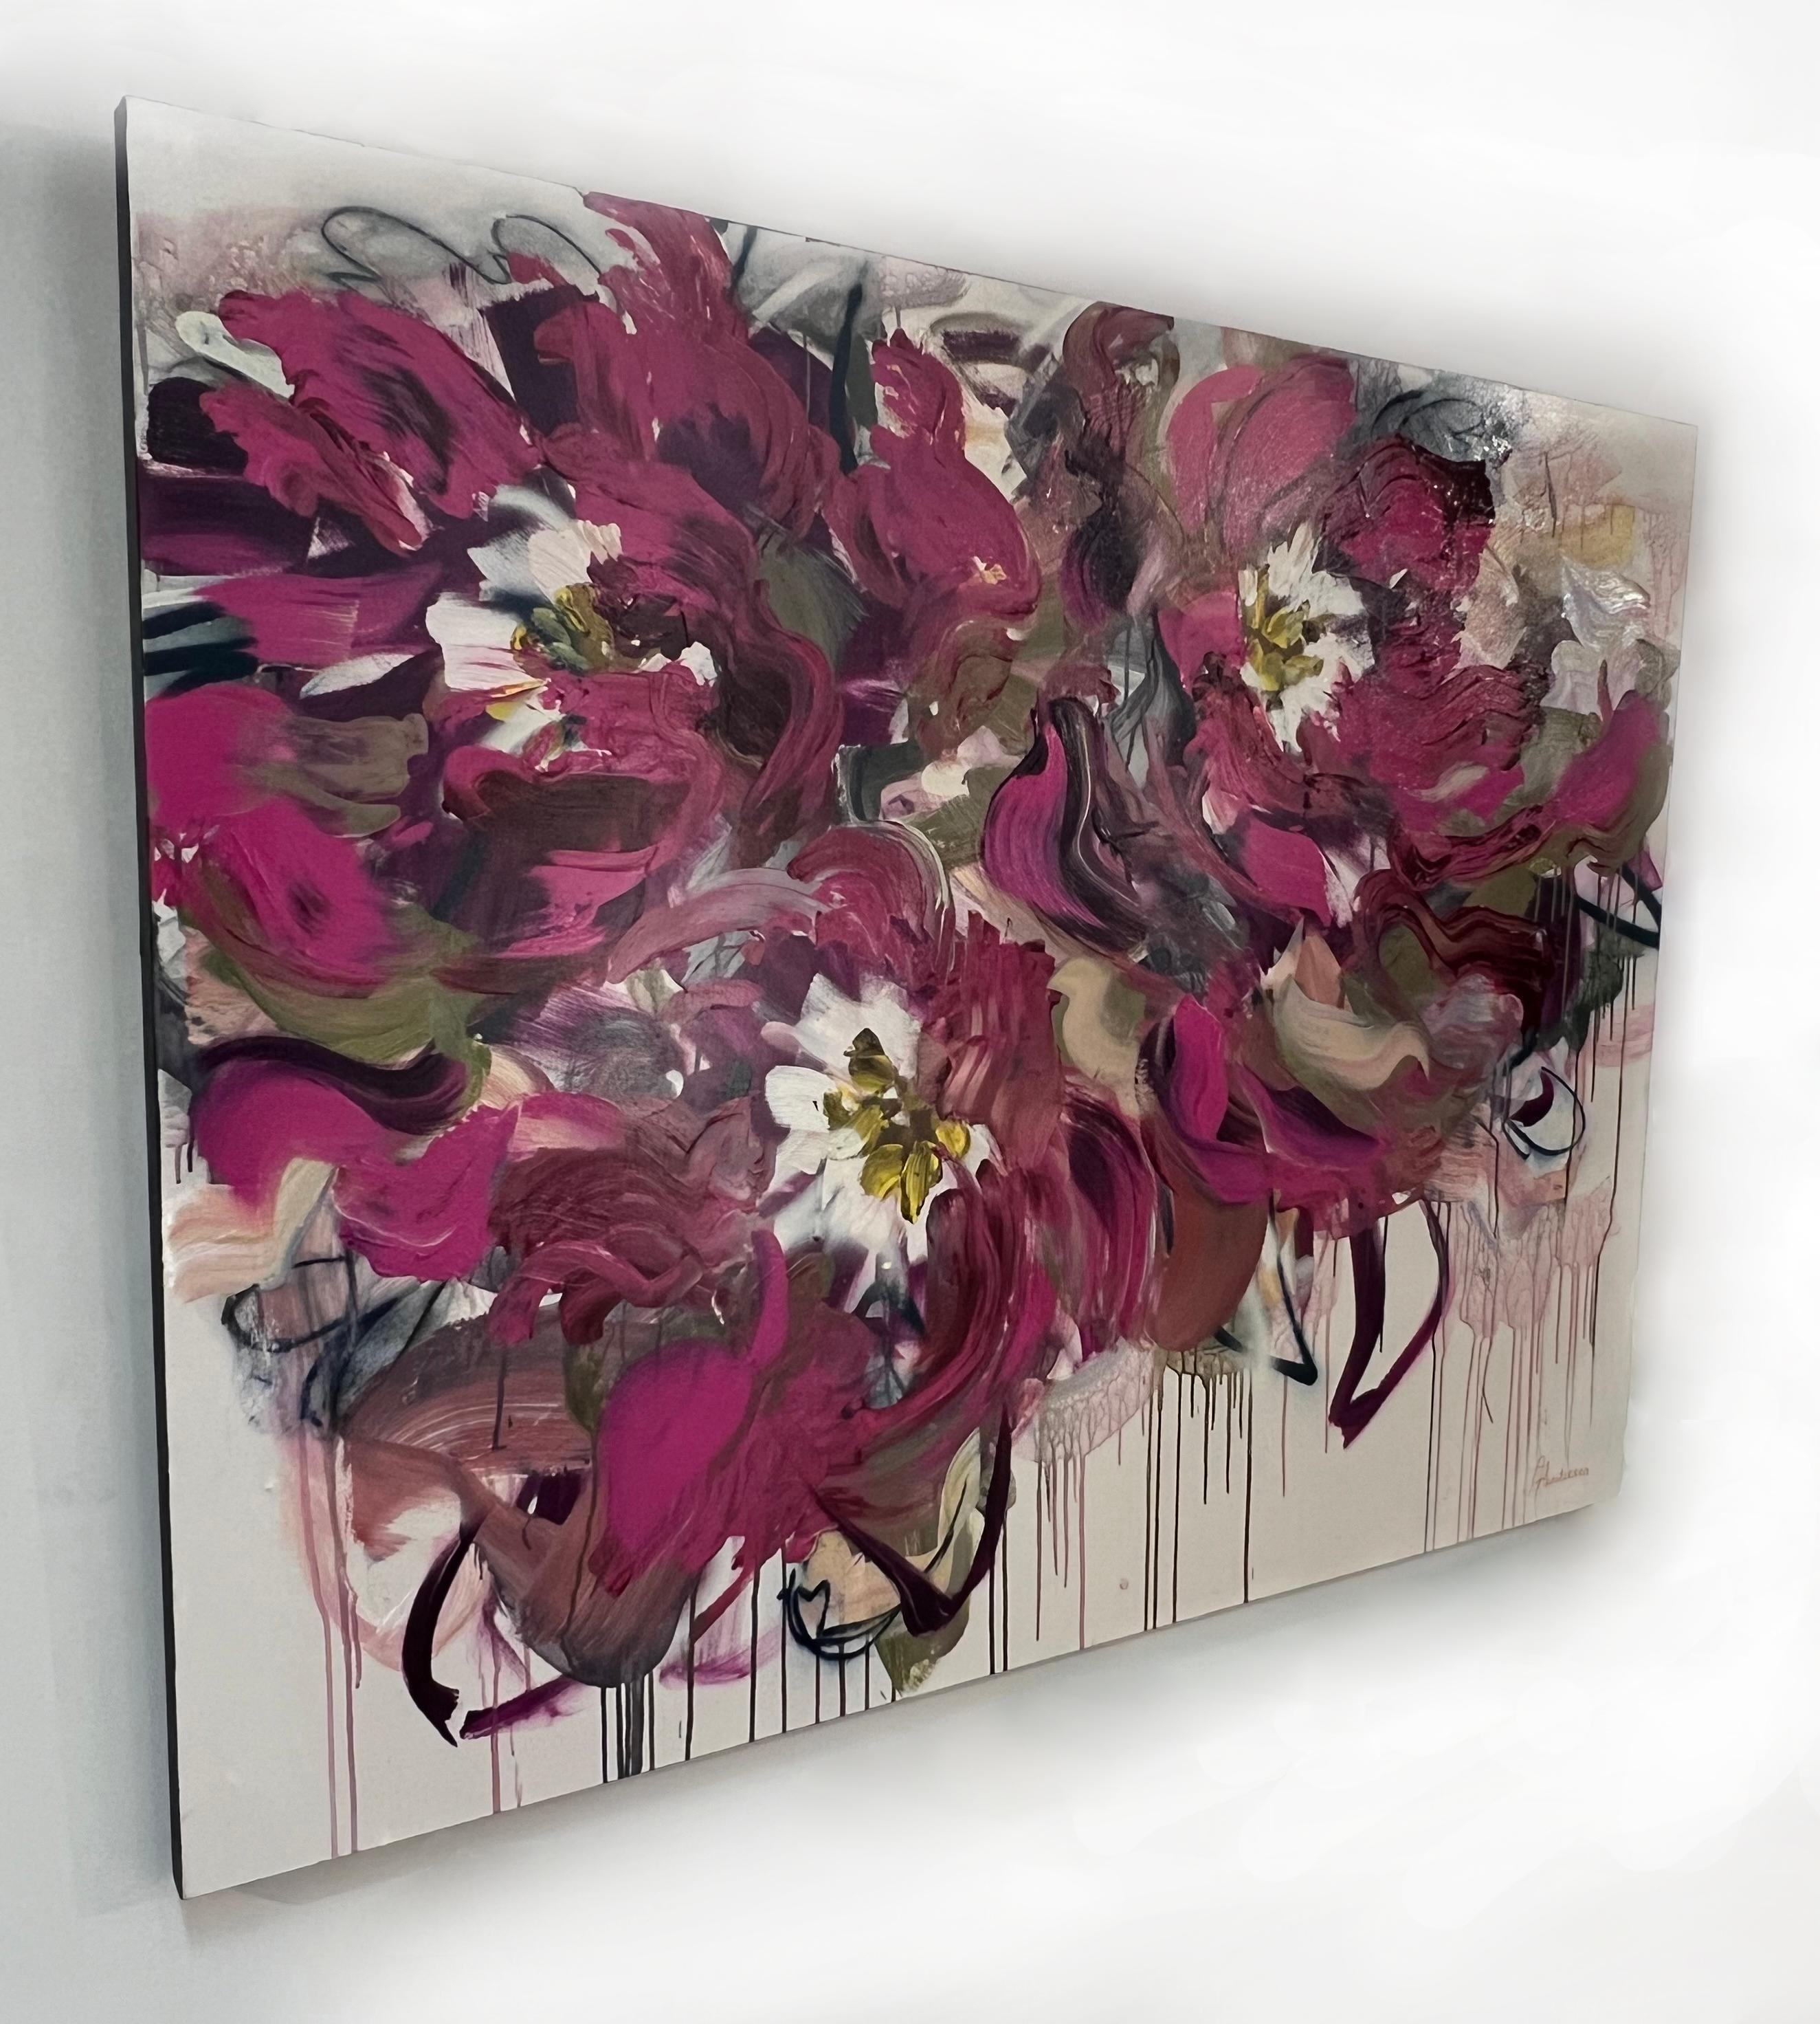 Thousand Kisses Deep Series #19, large red & pink floral abstract, acrylic, 2021 - Painting by Elena Henderson